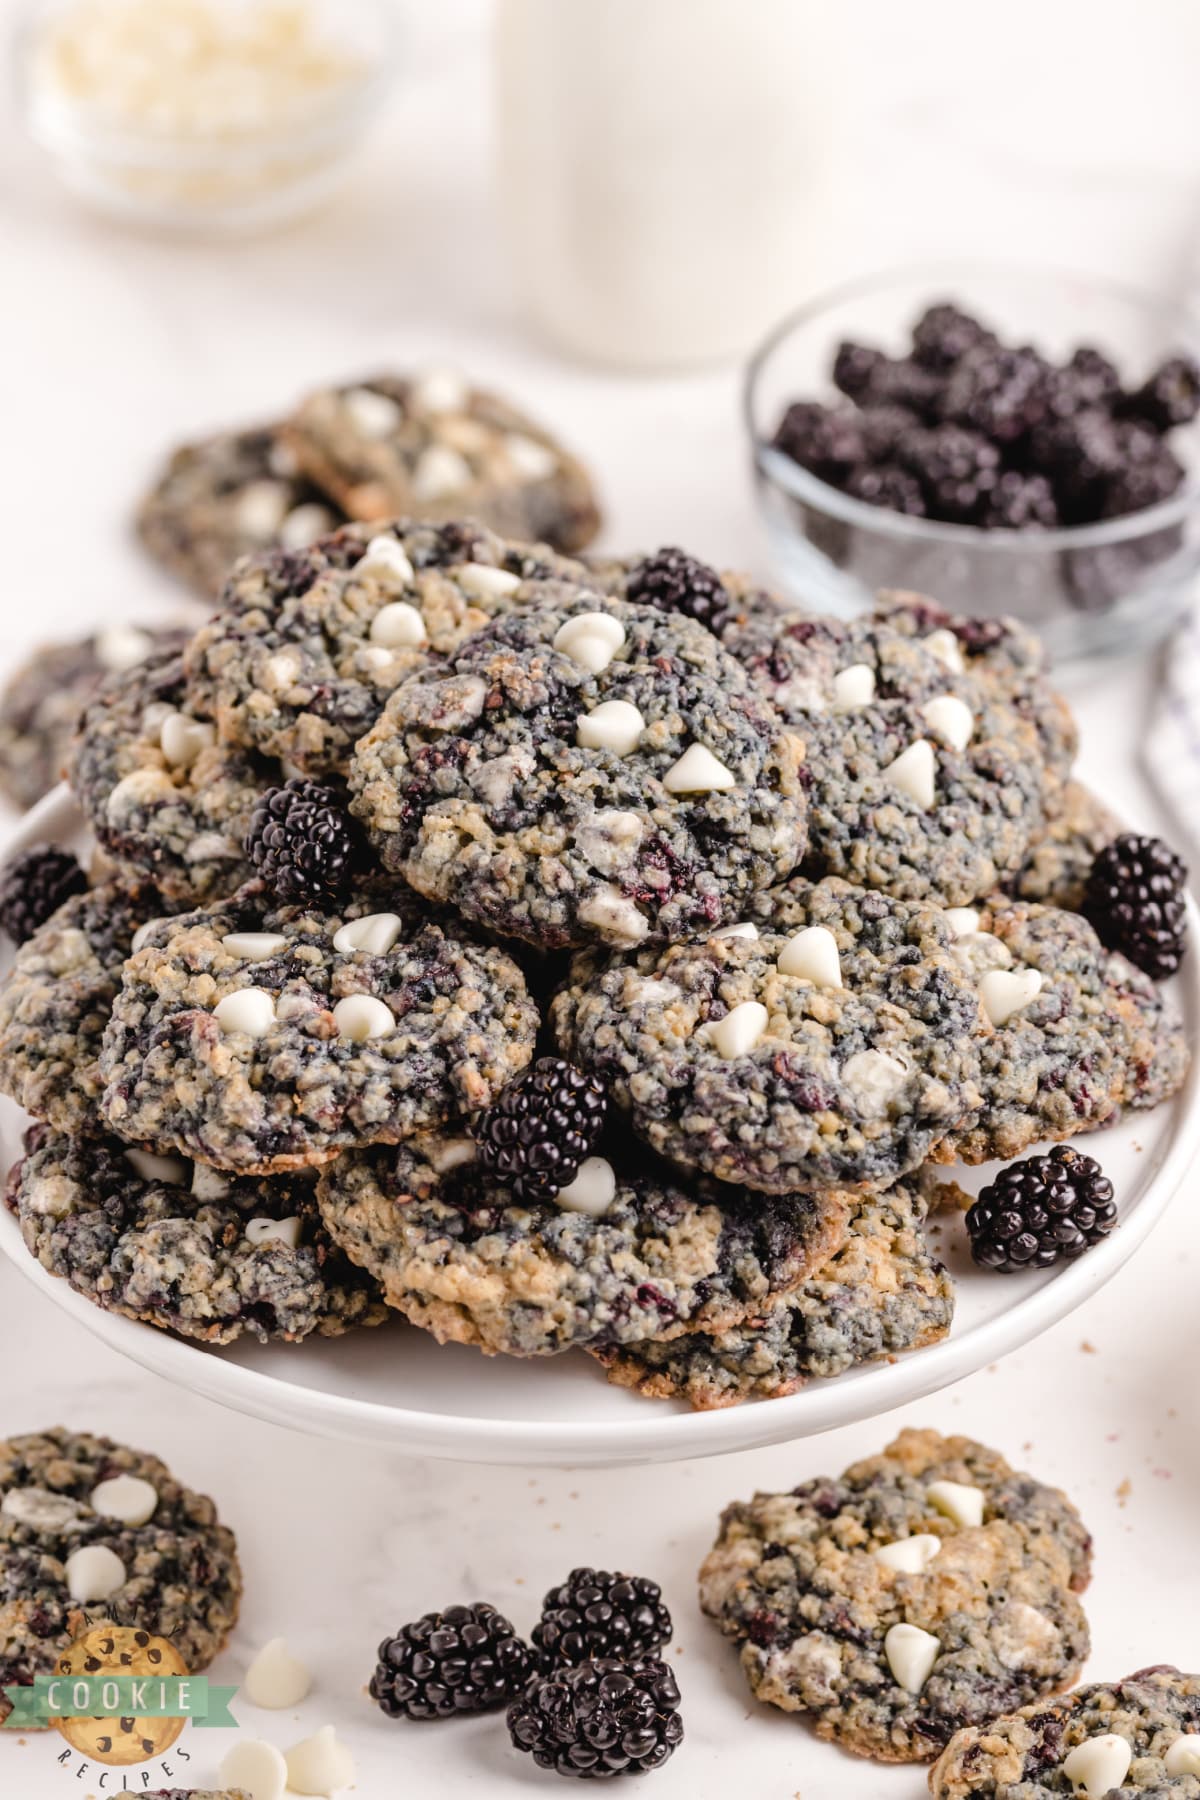 Blackberry Oatmeal Cookies are made by adding blackberries to a deliciously soft and chewy oatmeal cookie recipe. 